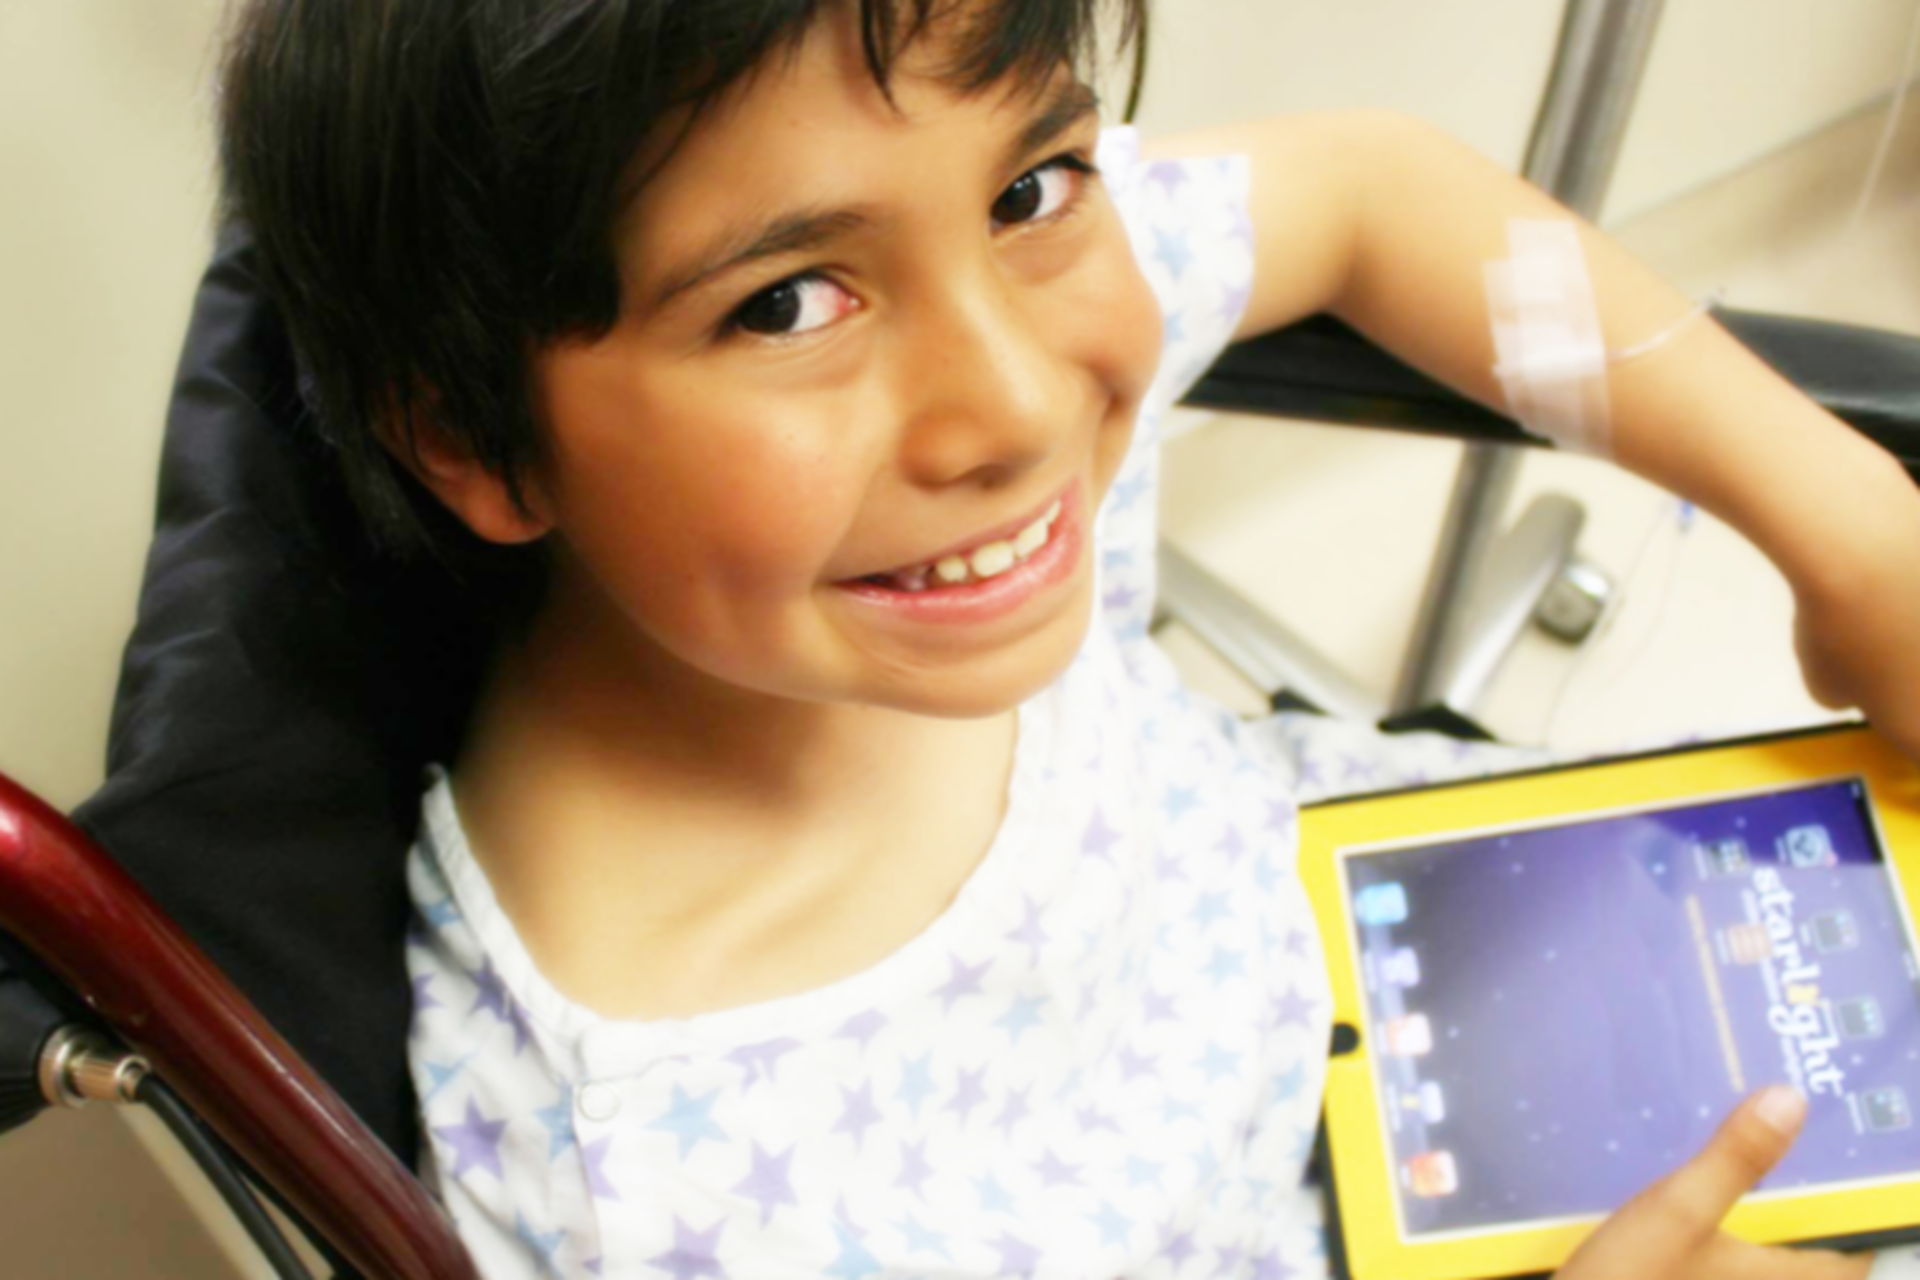 Starlight Tablets put the power of technology in kids’ hands (2014). 